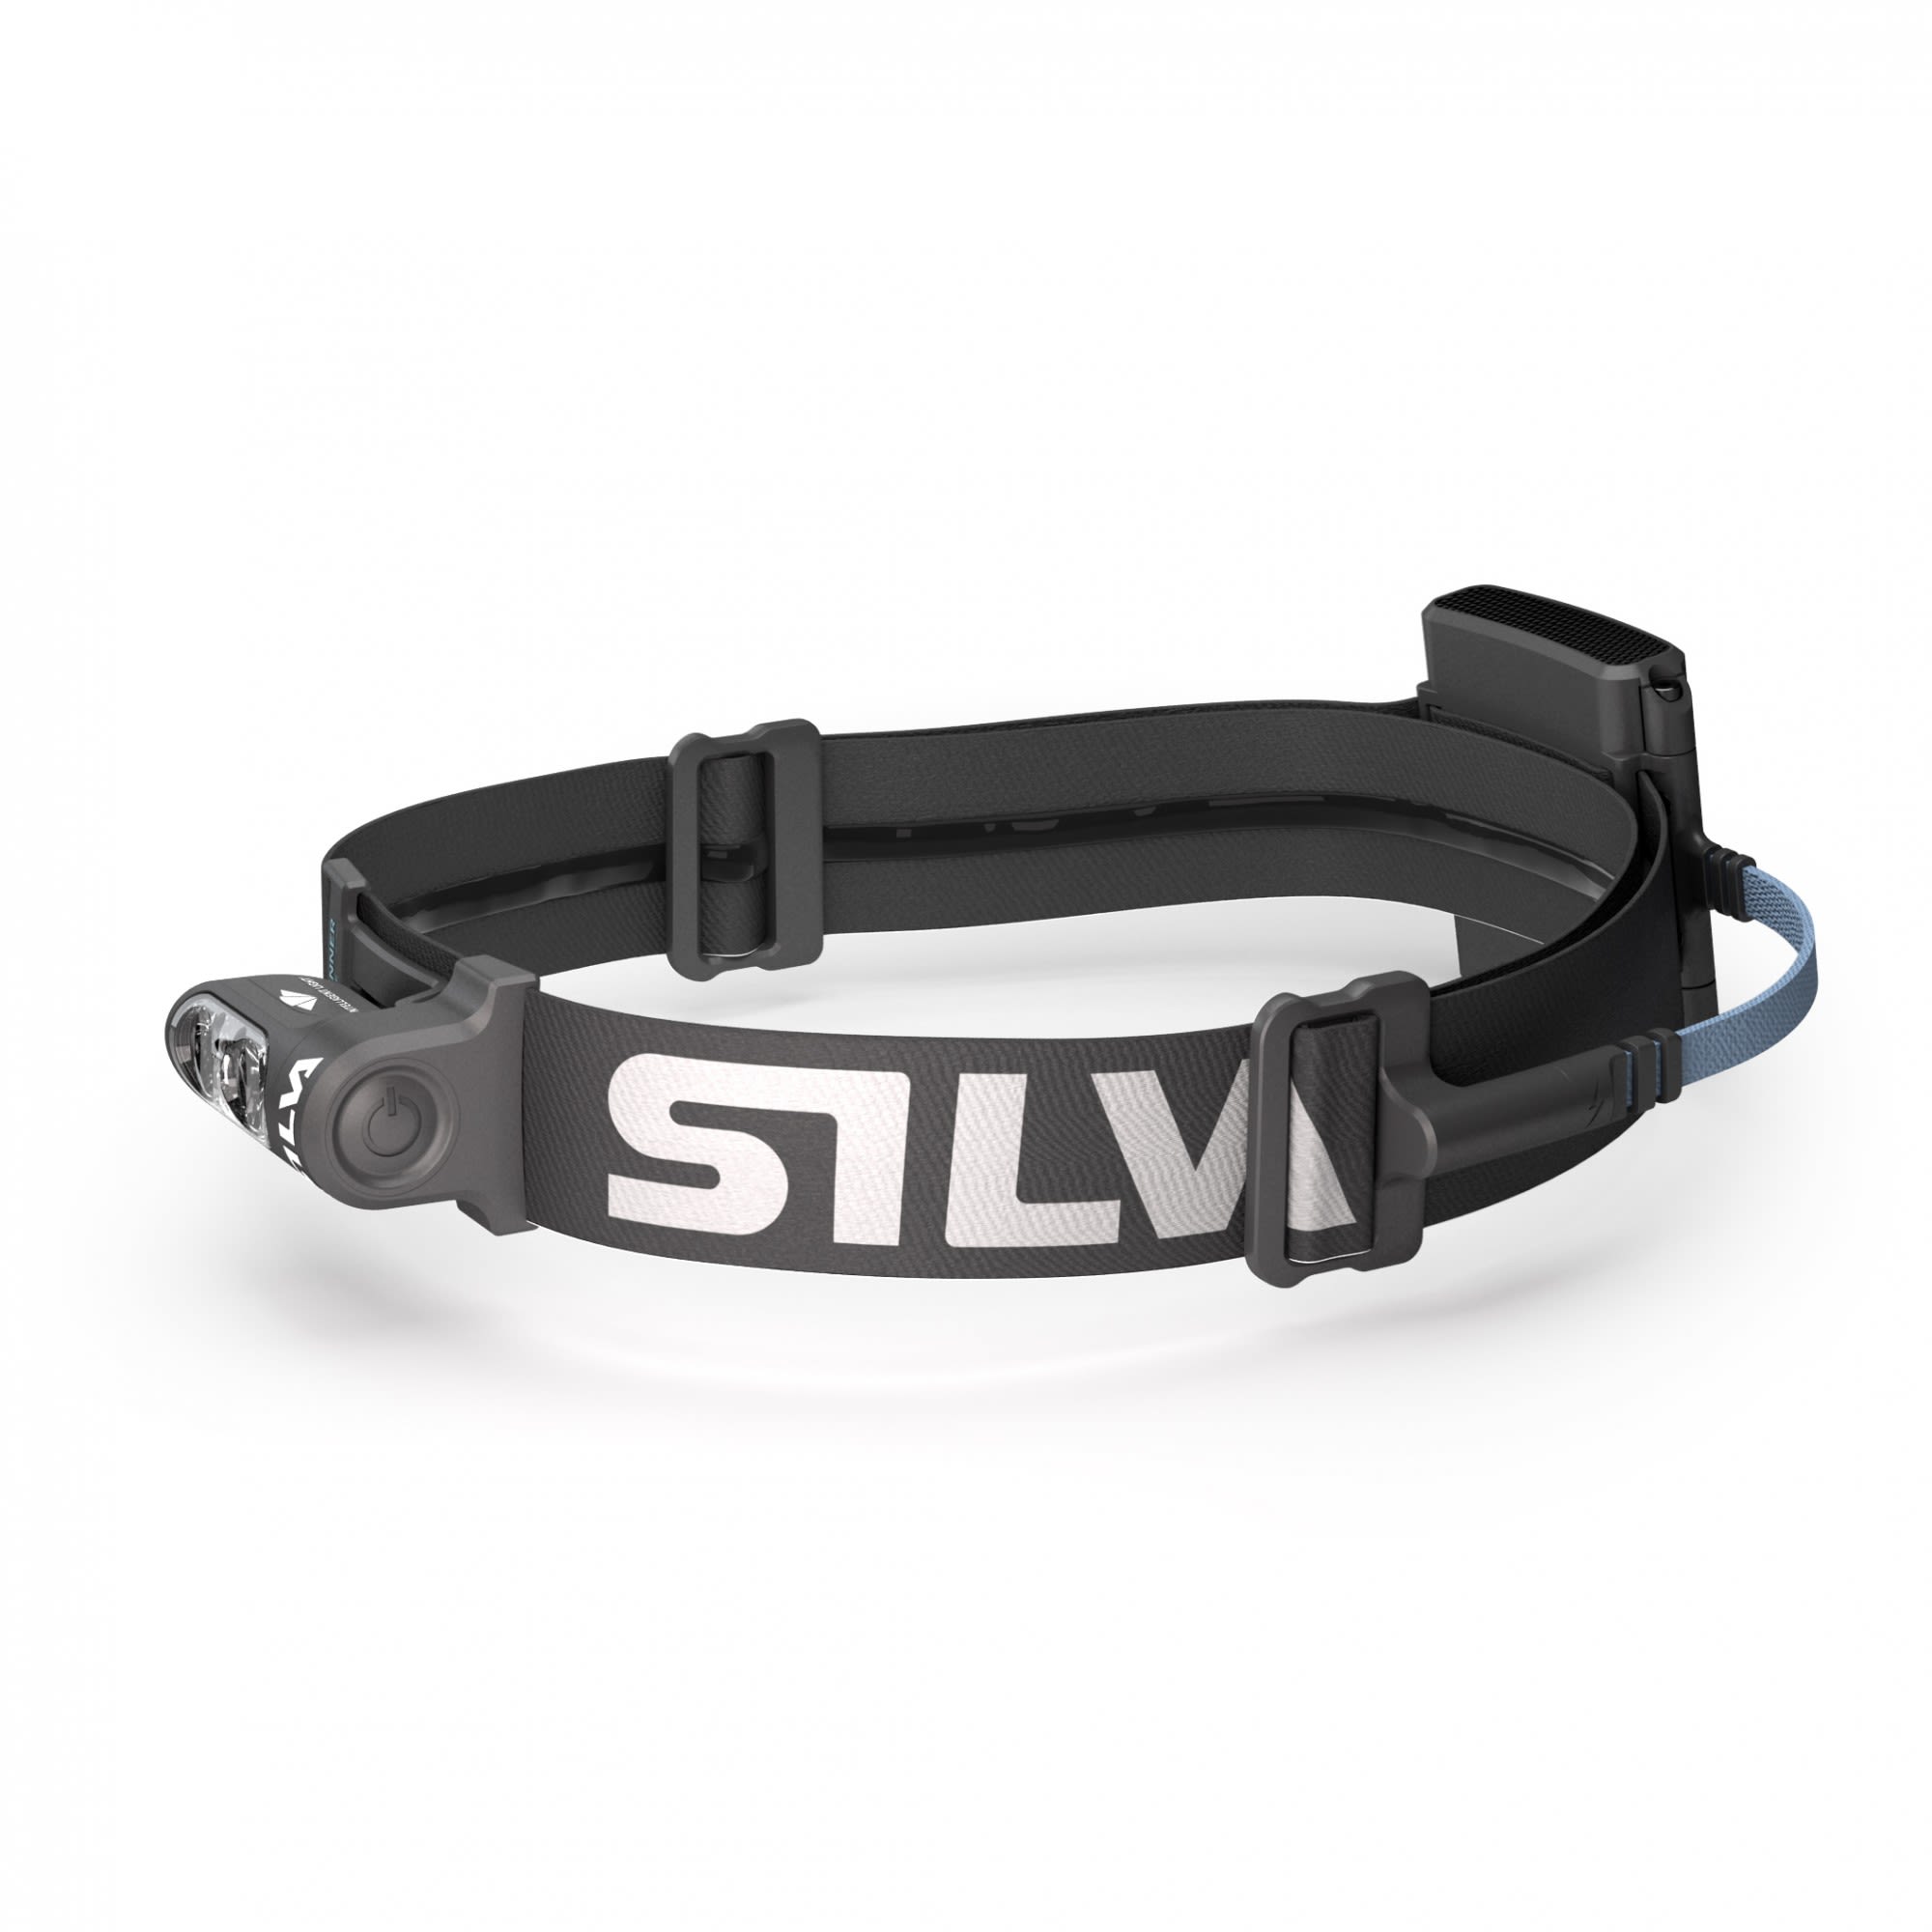 Silva Trail Runner Free Grau- Stirnlampen- Grsse One Size - Farbe Anthracite